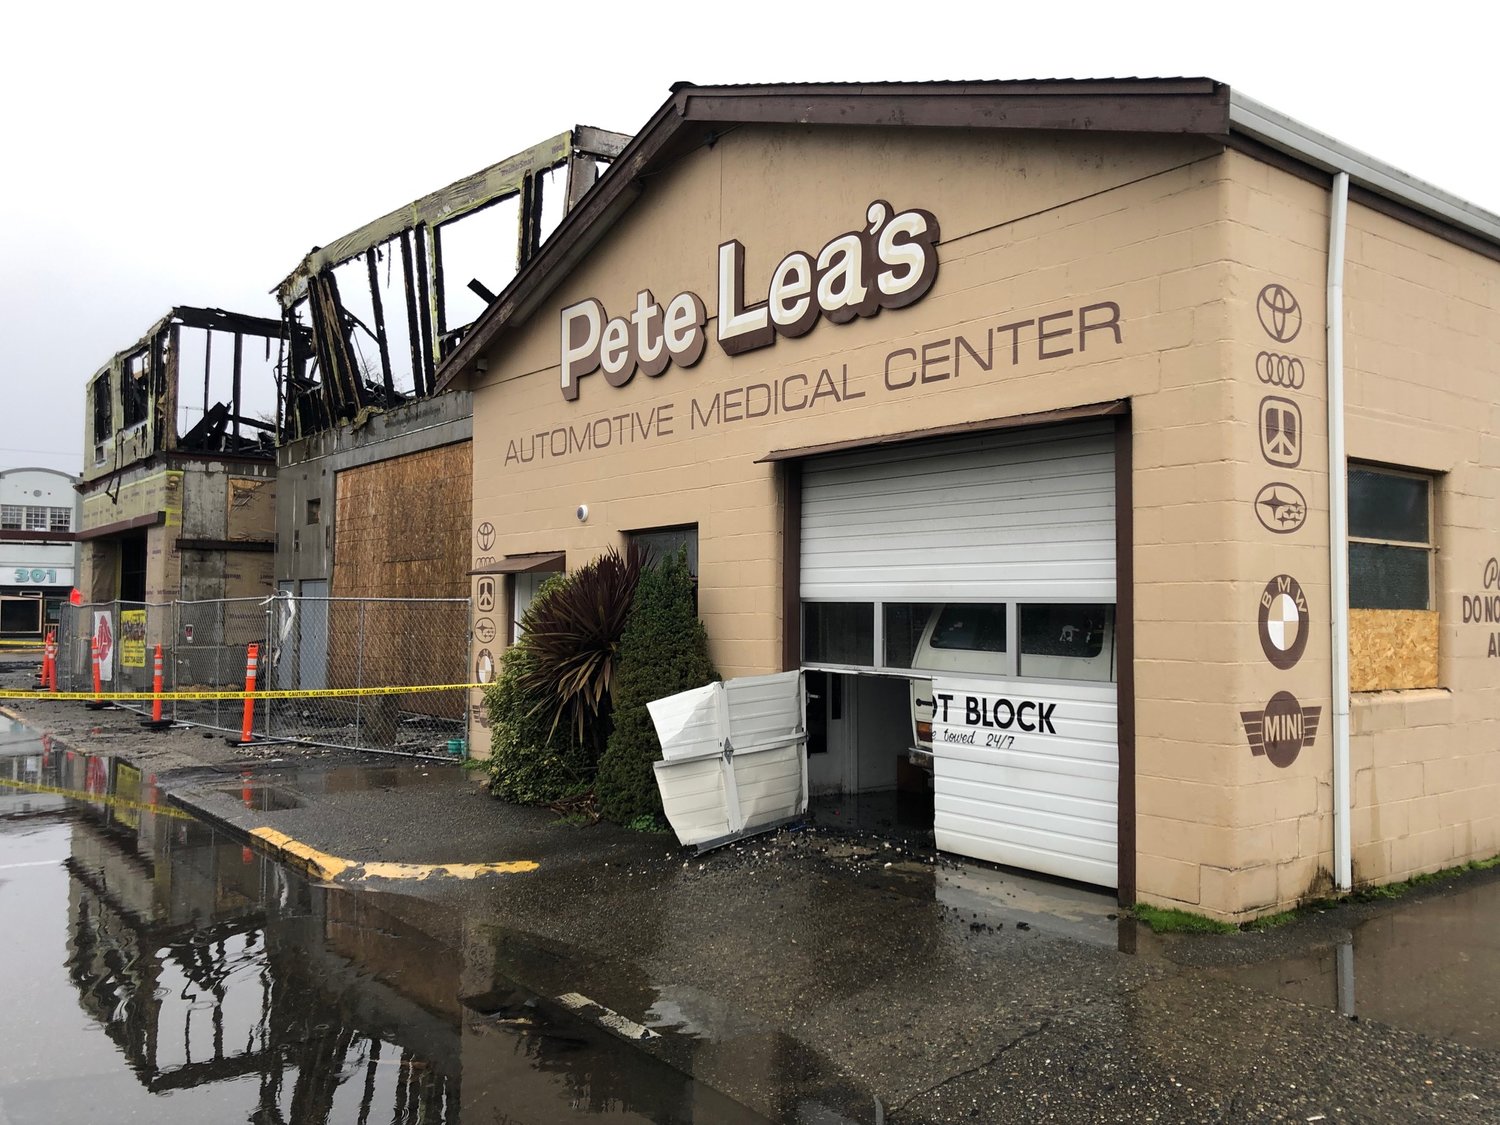 The building that houses Pete Lea's Automotive Medical Center was significantly damaged starting at the roof.